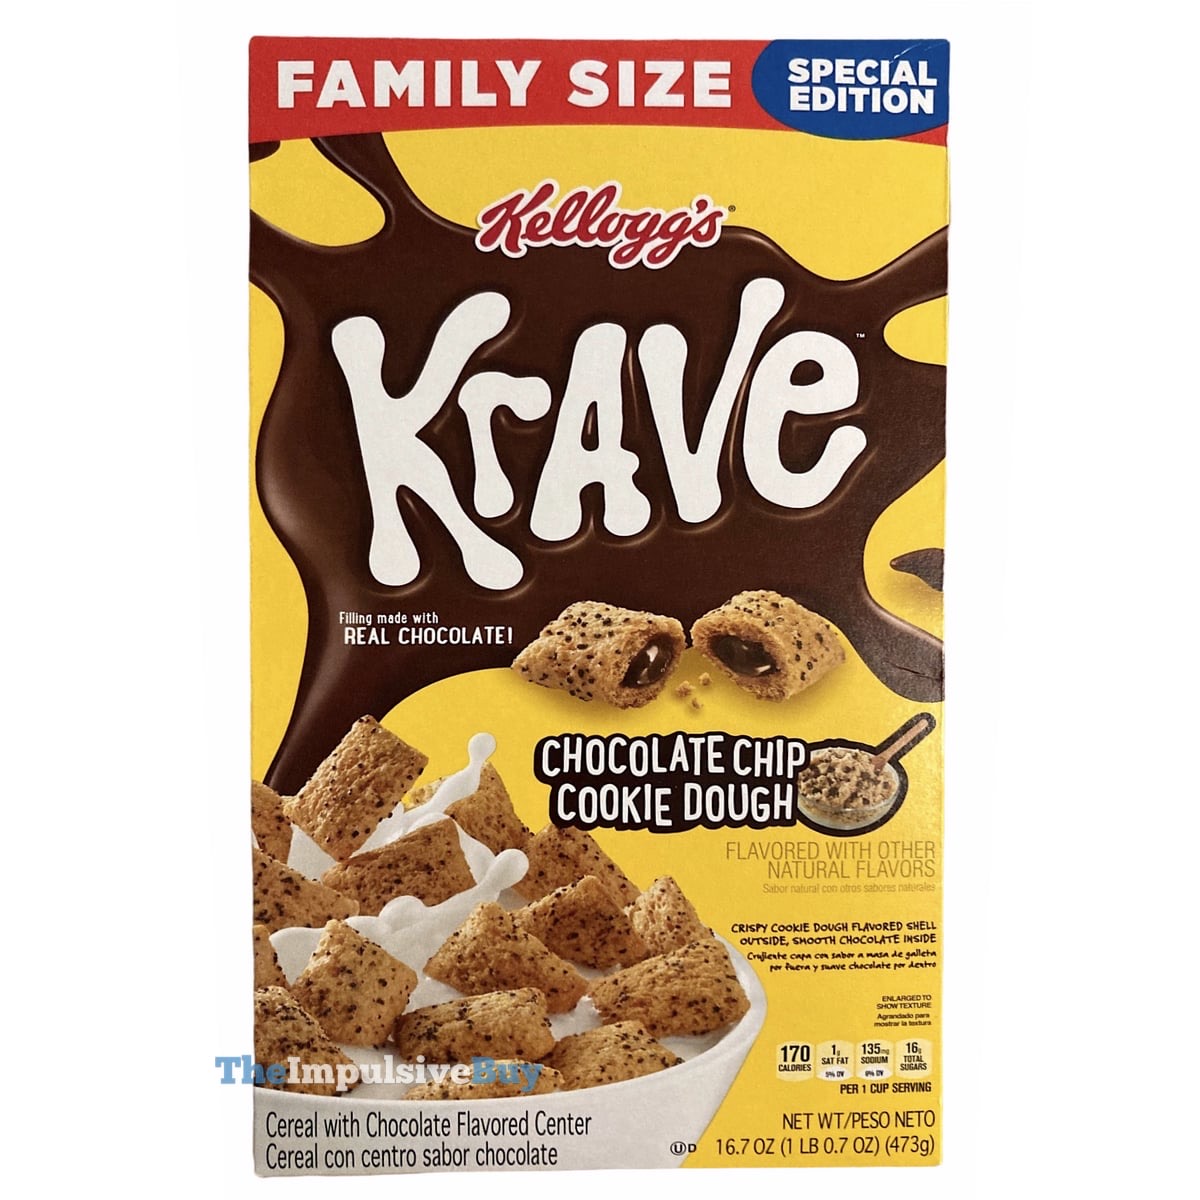 REVIEW: Kellogg's Special Edition Krave Chocolate Chip Cookie Dough Ce...